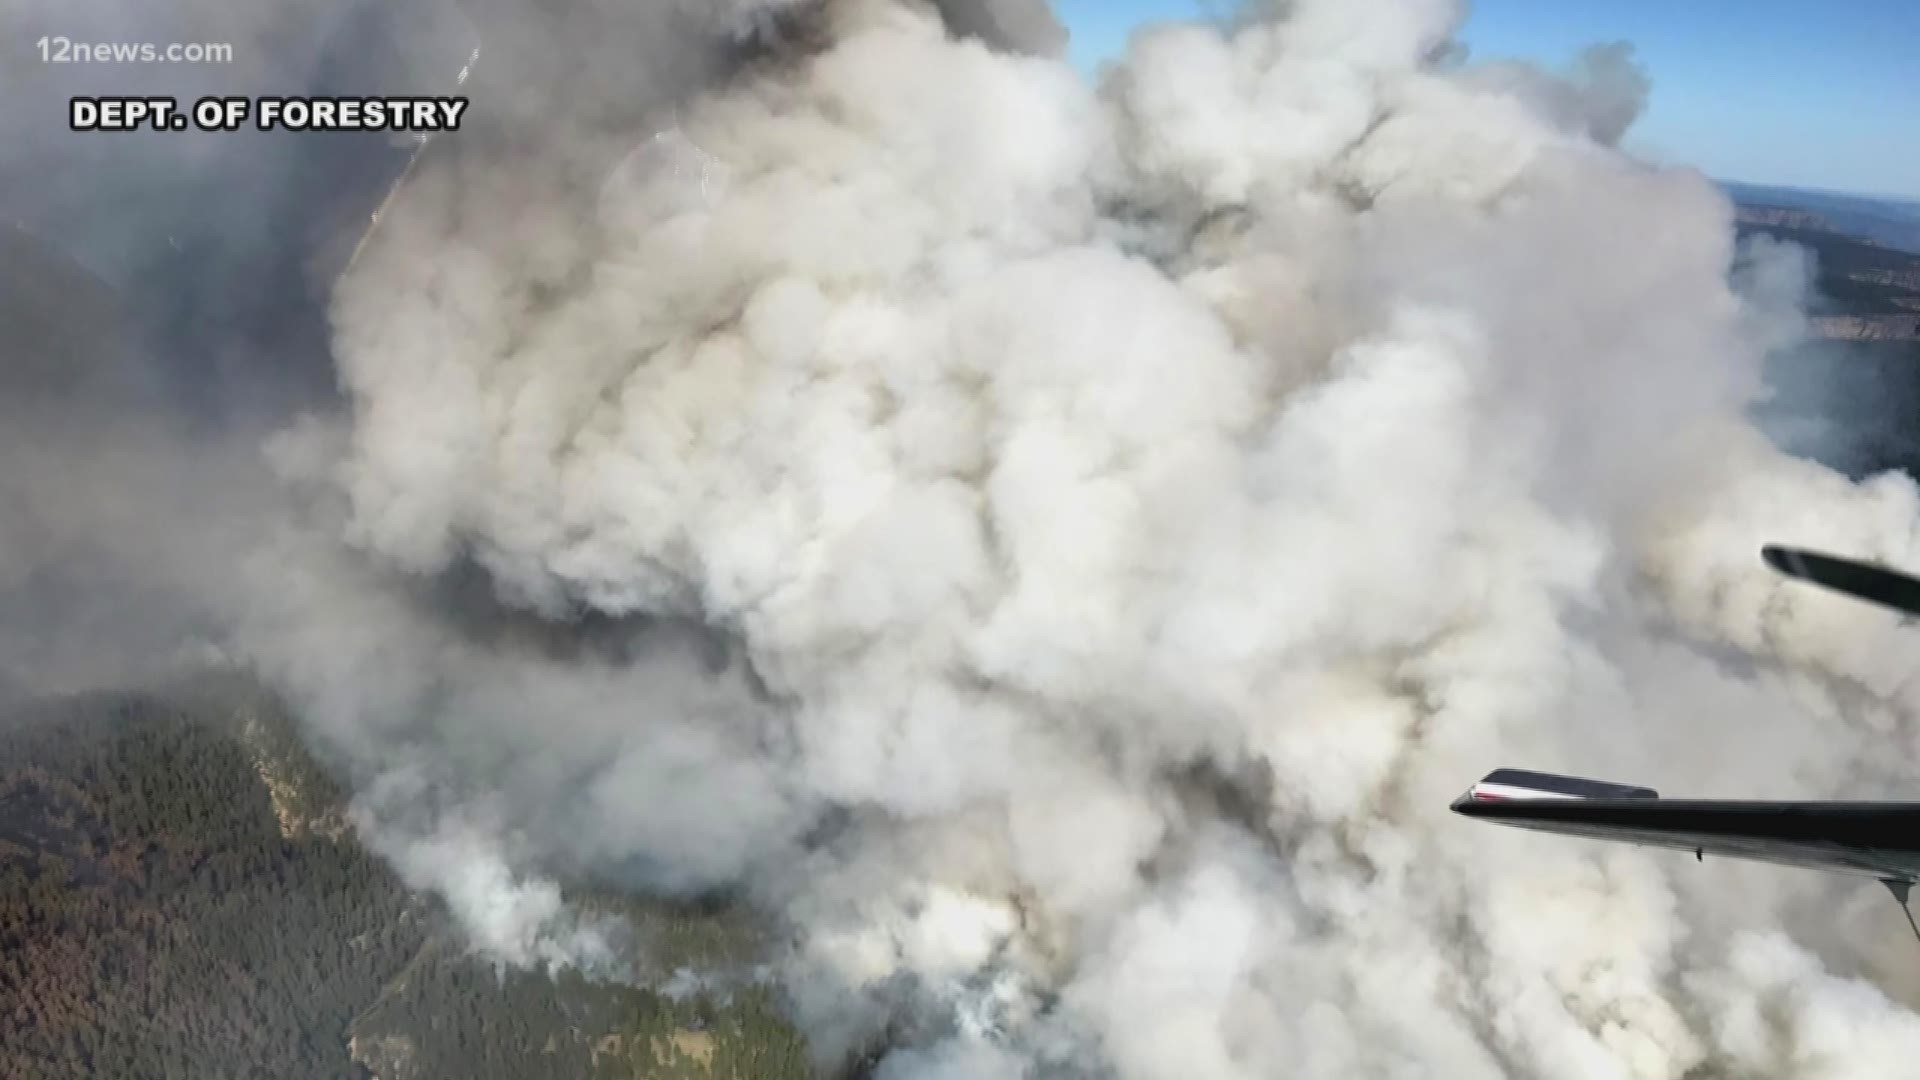 The Coldwater Fire near Clints Well, Arizona, burned nearly 6,000 acres on Saturday before an air attack had to be halted because firefighters spotted a drone. The 12 News' Night Team gives the latest update Sunday night.